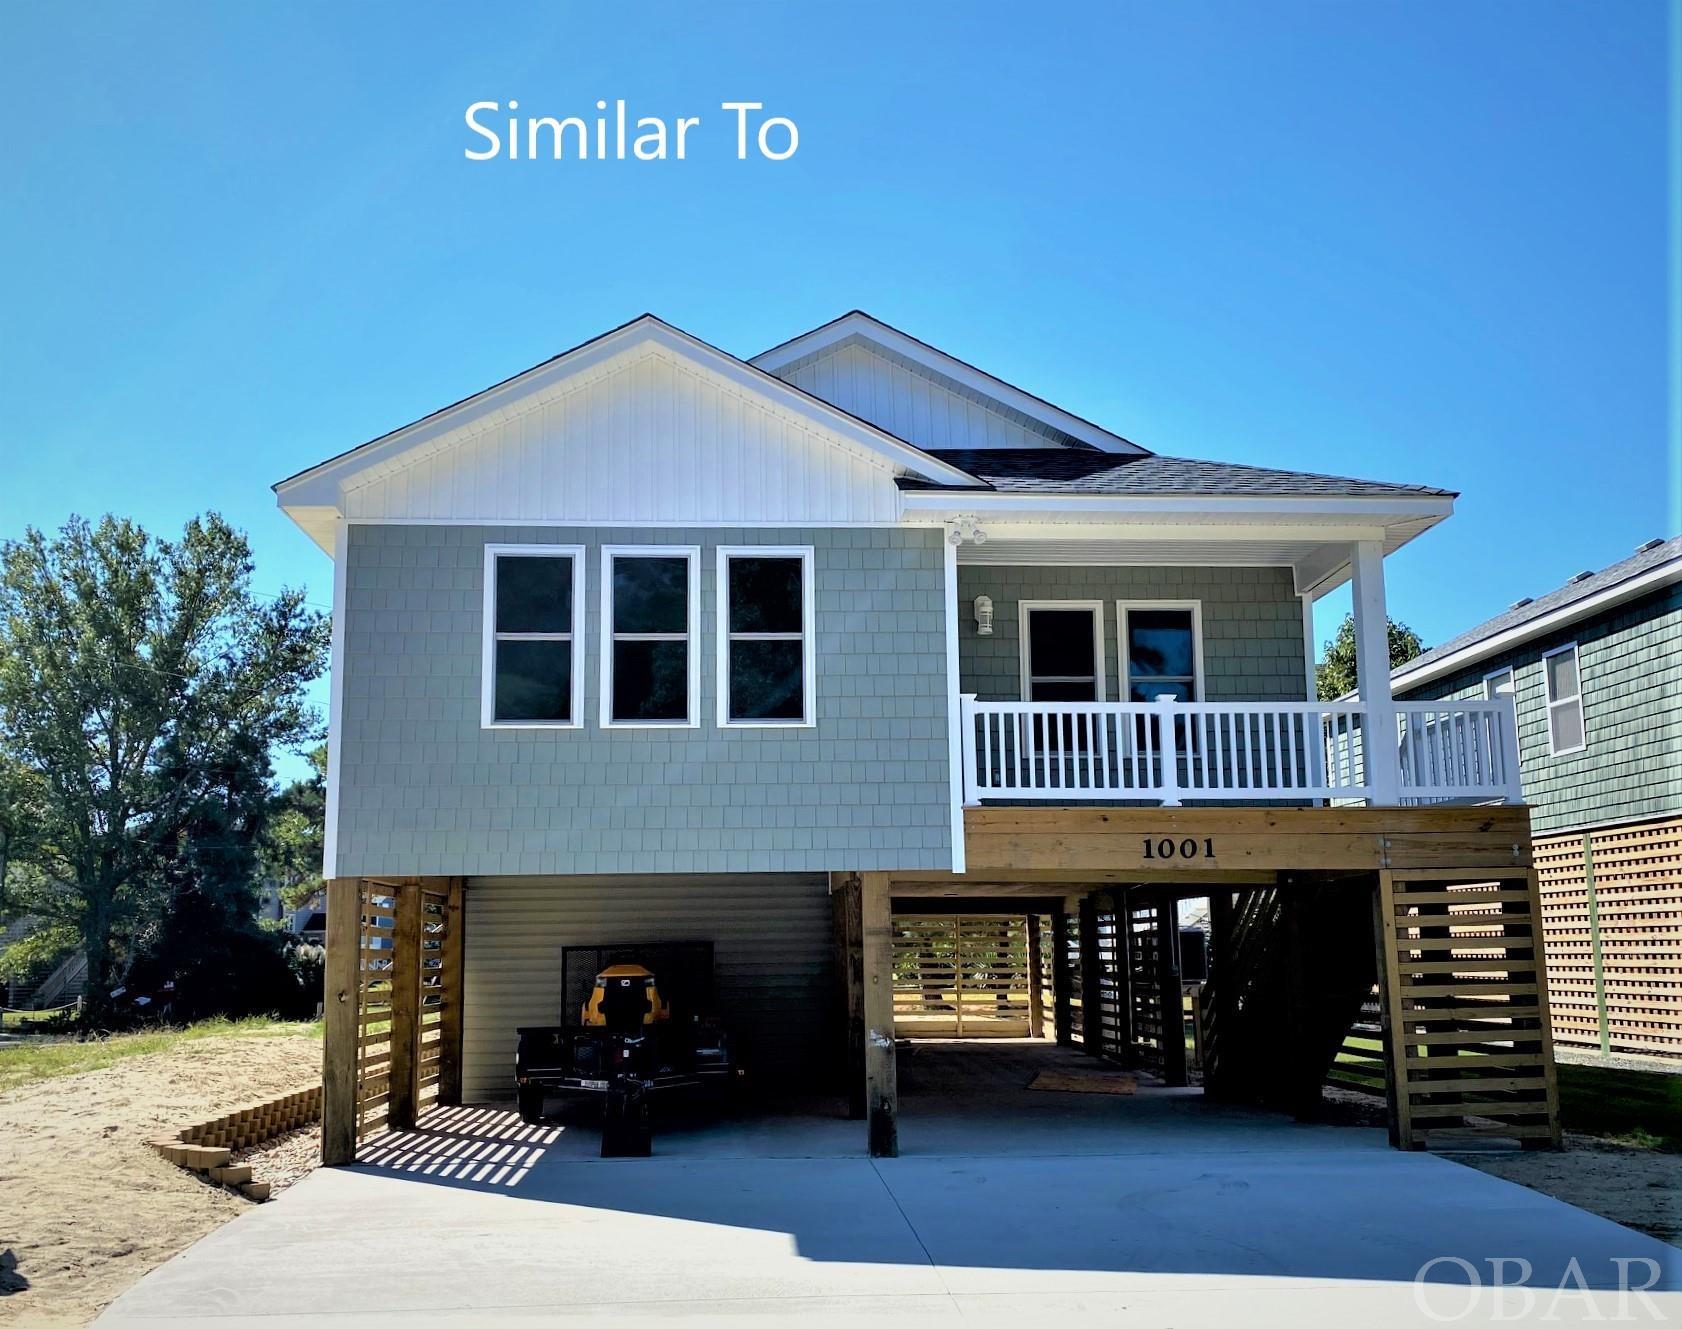 712 Colington Drive lot 144 Outer Banks Home Listings - Holleay Parcker - Spinnaker Realty Outer Banks (OBX) Real Estate